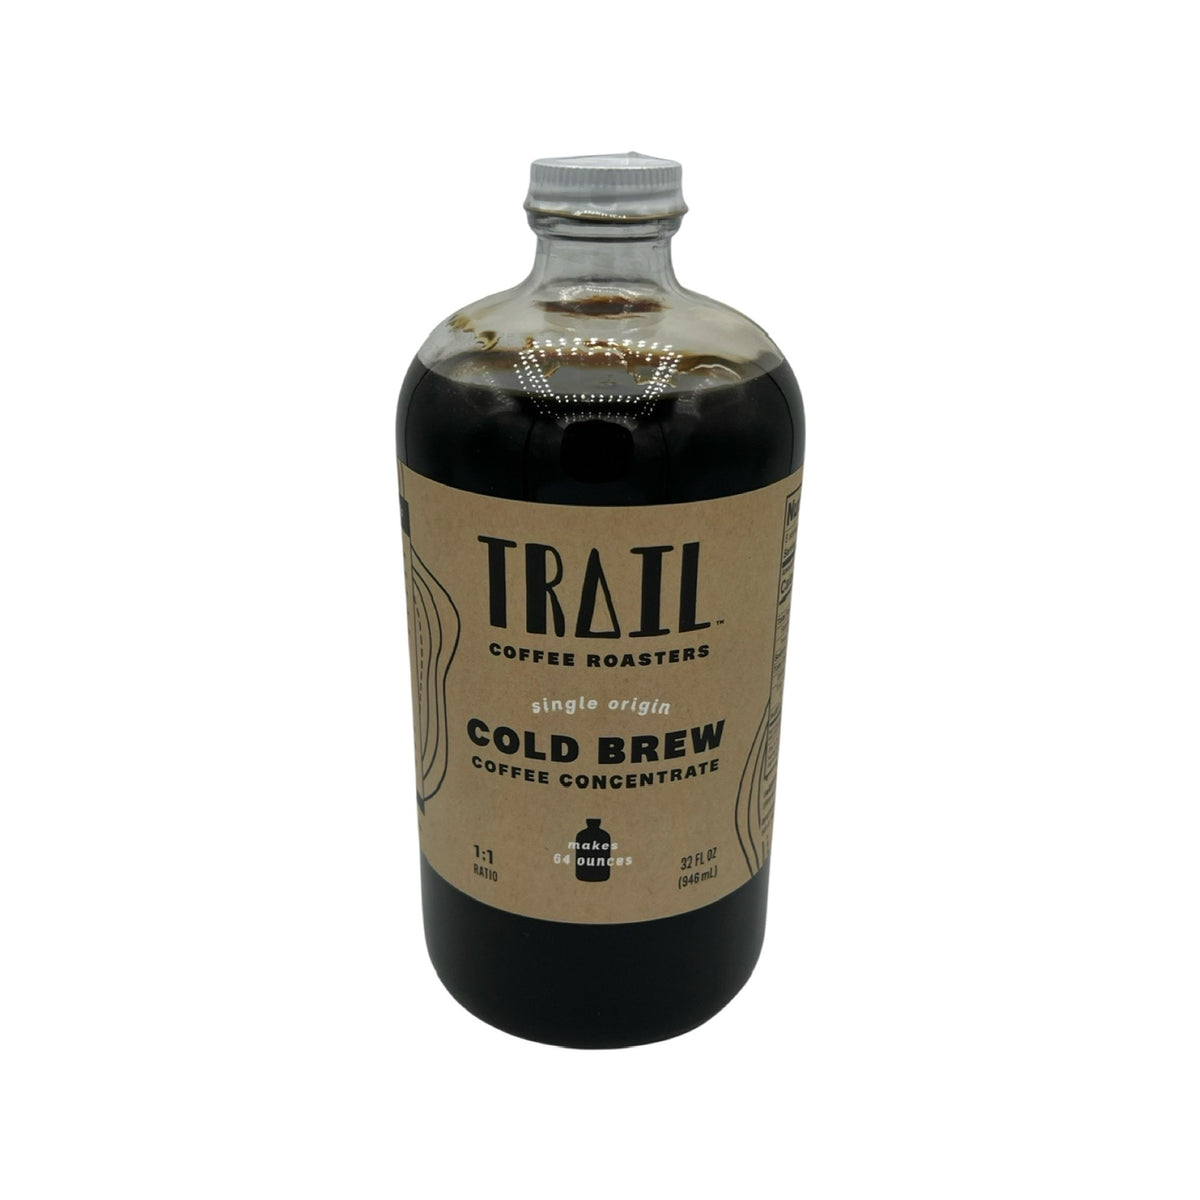 Cold Brew Coffee Concentrate